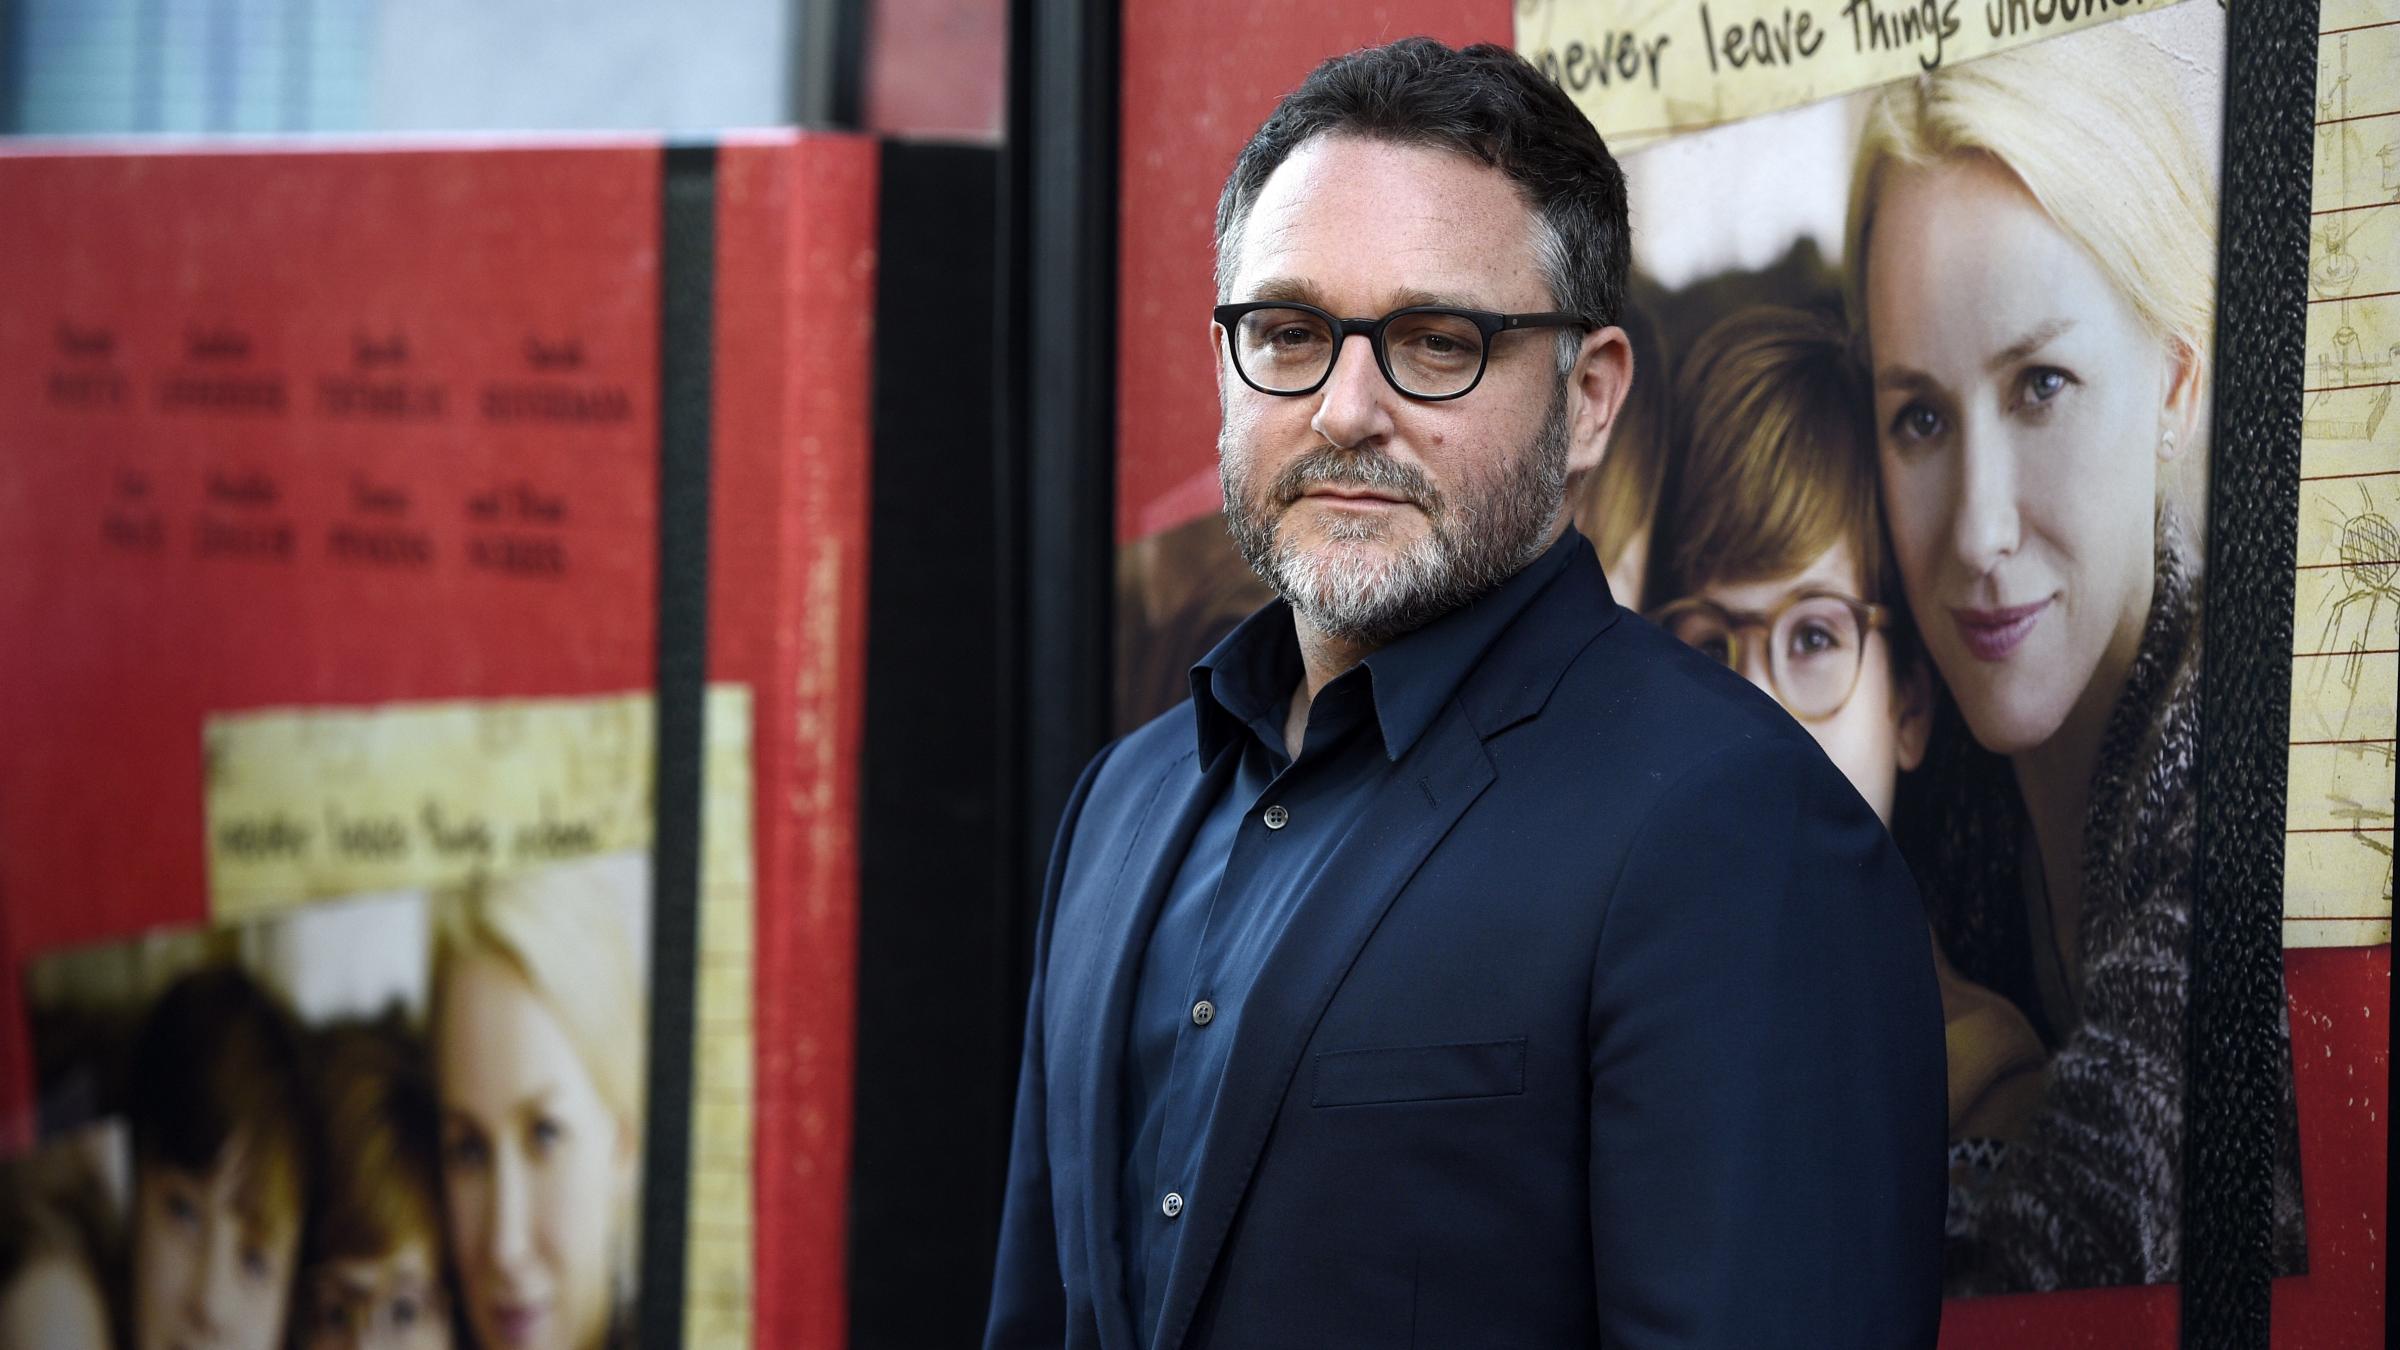 Star Wars director Colin Trevorrow vows to keep Carrie Fisher’s ‘soul alive’